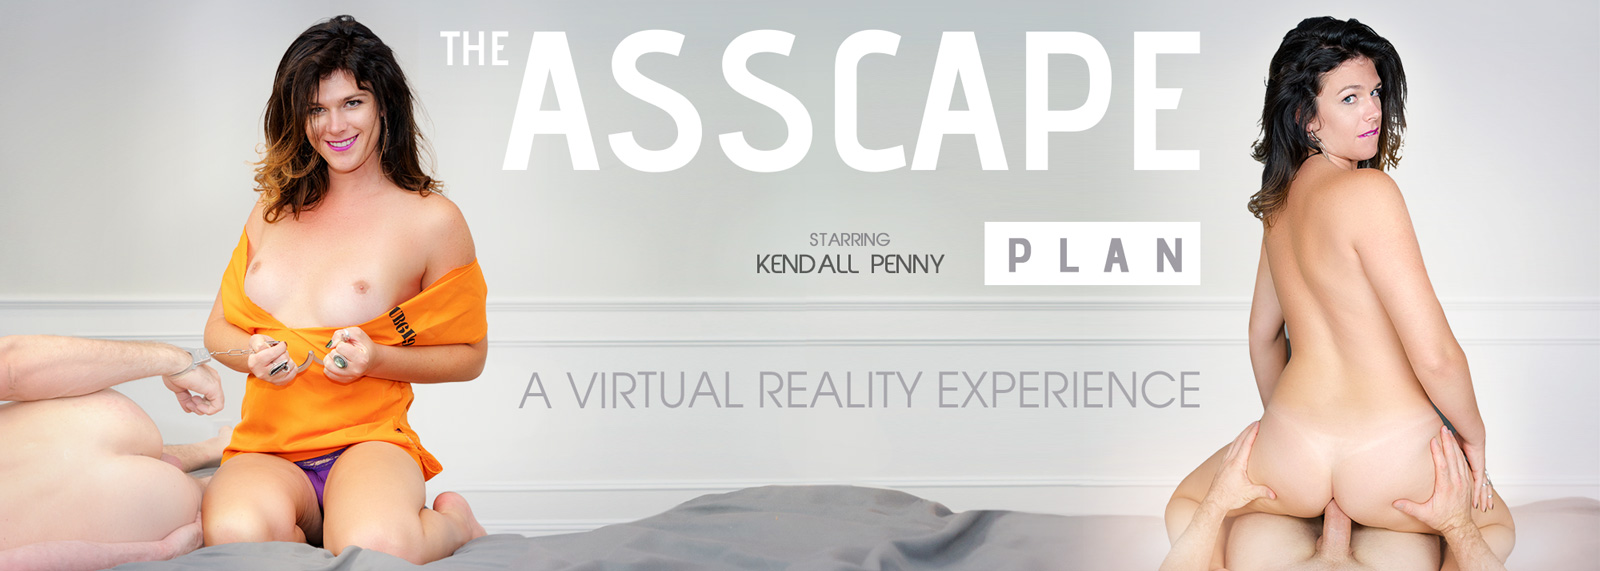 The Asscape Plan - Trans VR Porn Video, Starring: Kendall Penny